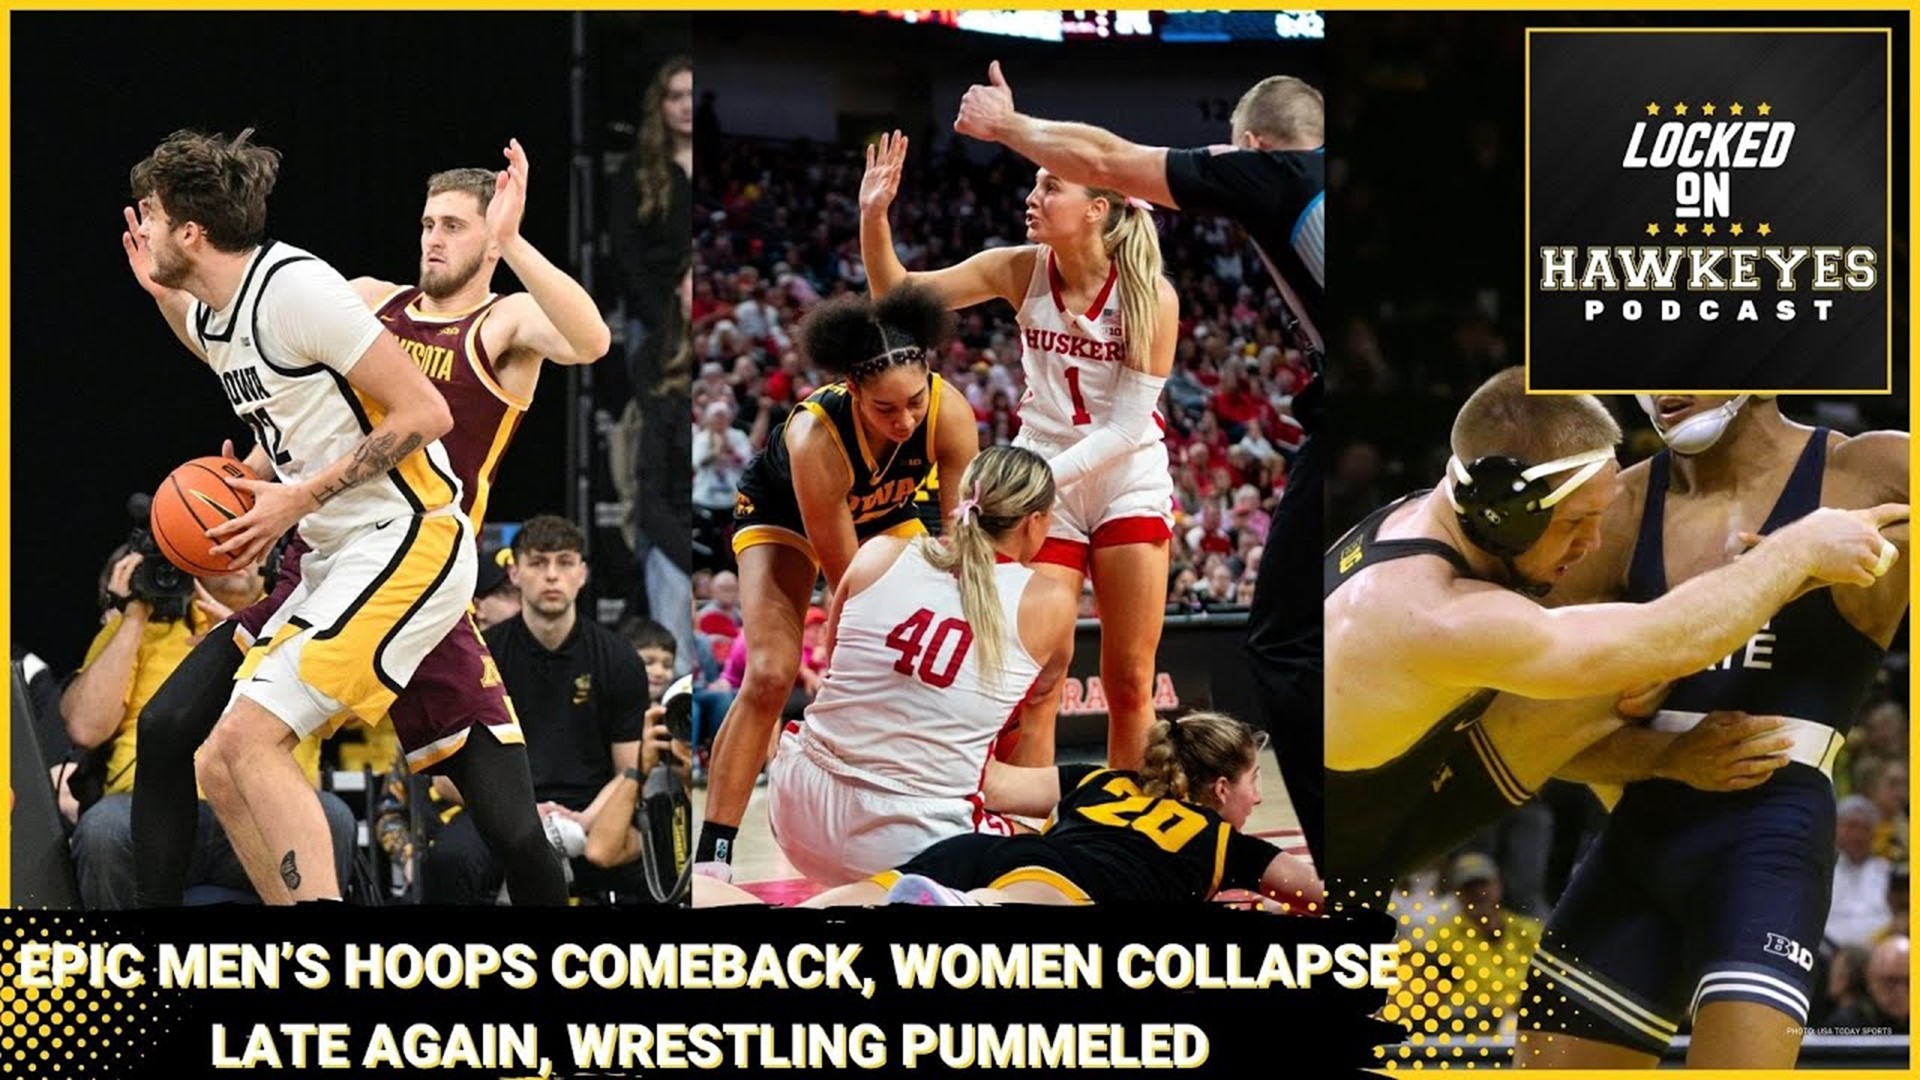 Instant Reaction: An Epic Hawkeye comeback win, women collapse late again